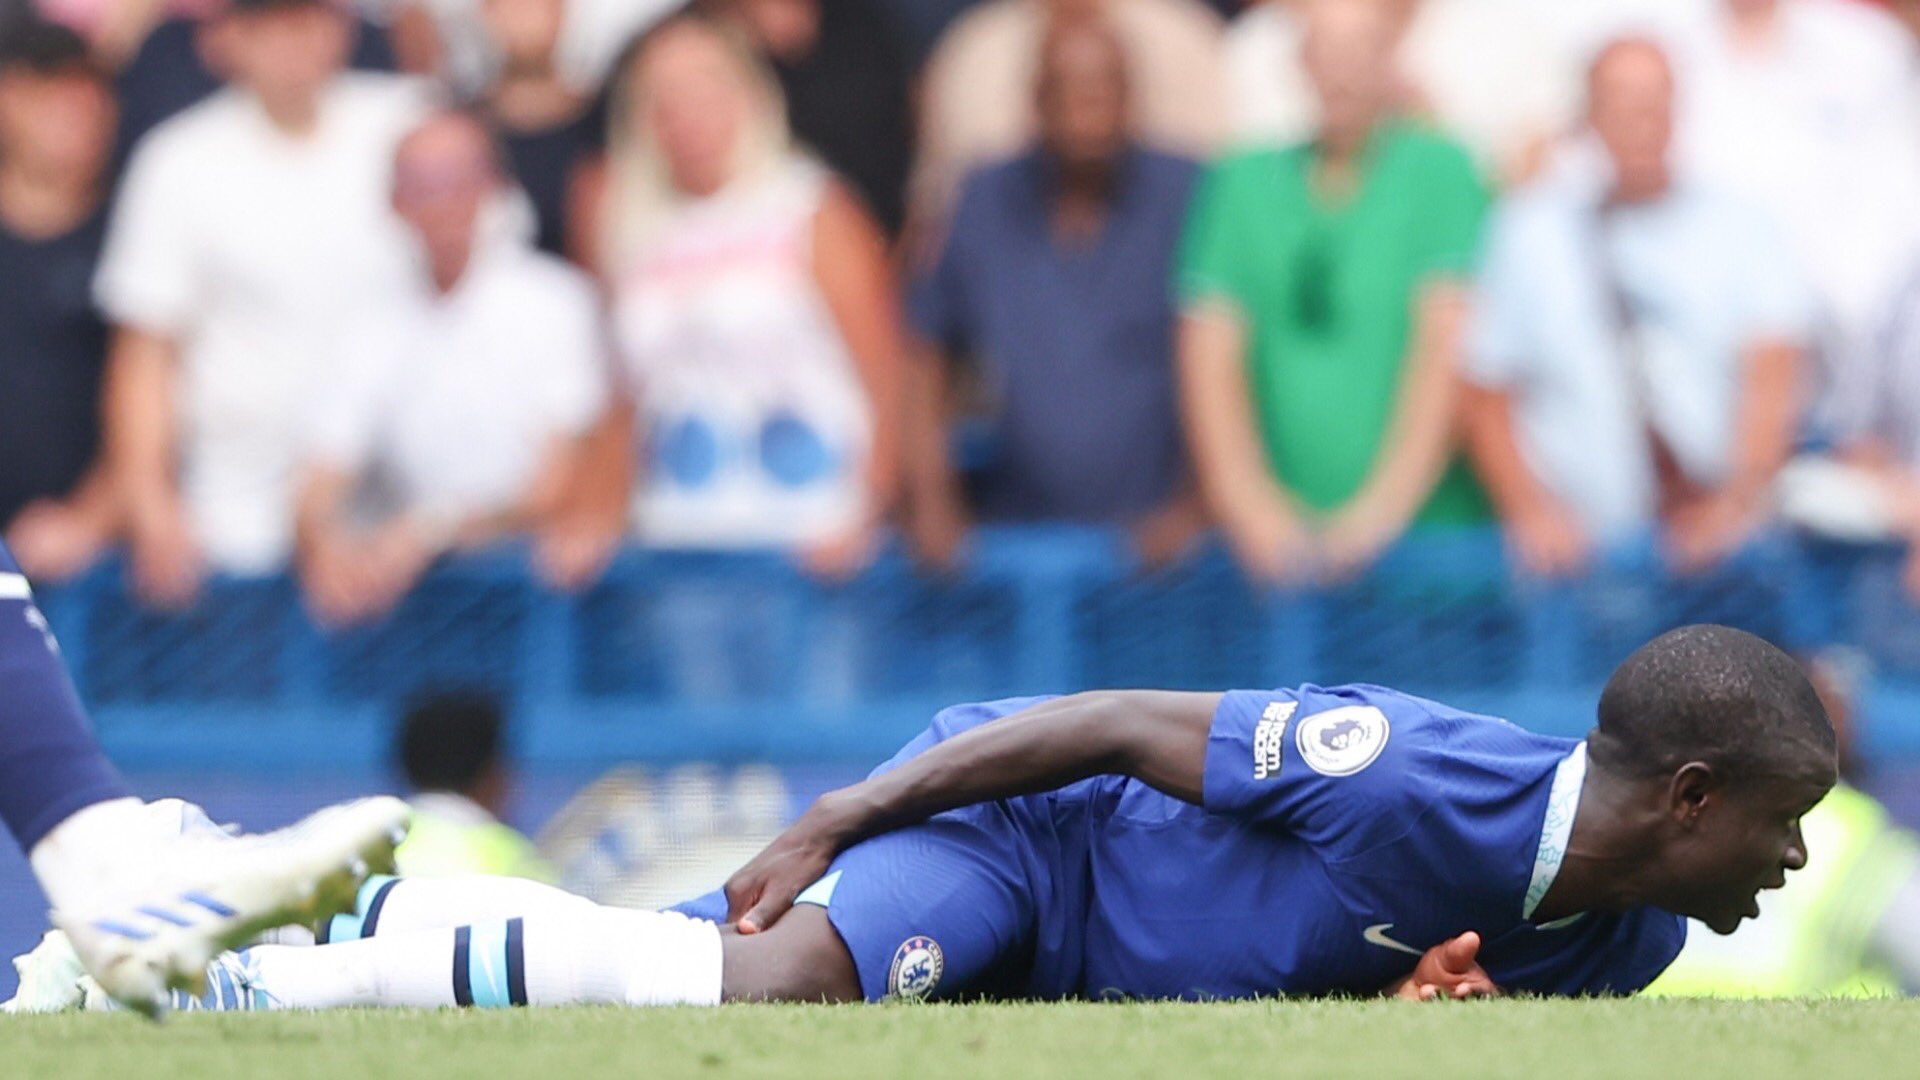 FIFA World Cup: N' Golo Kante set to sit out on World Cup following hamstring woes-CHECK OUT